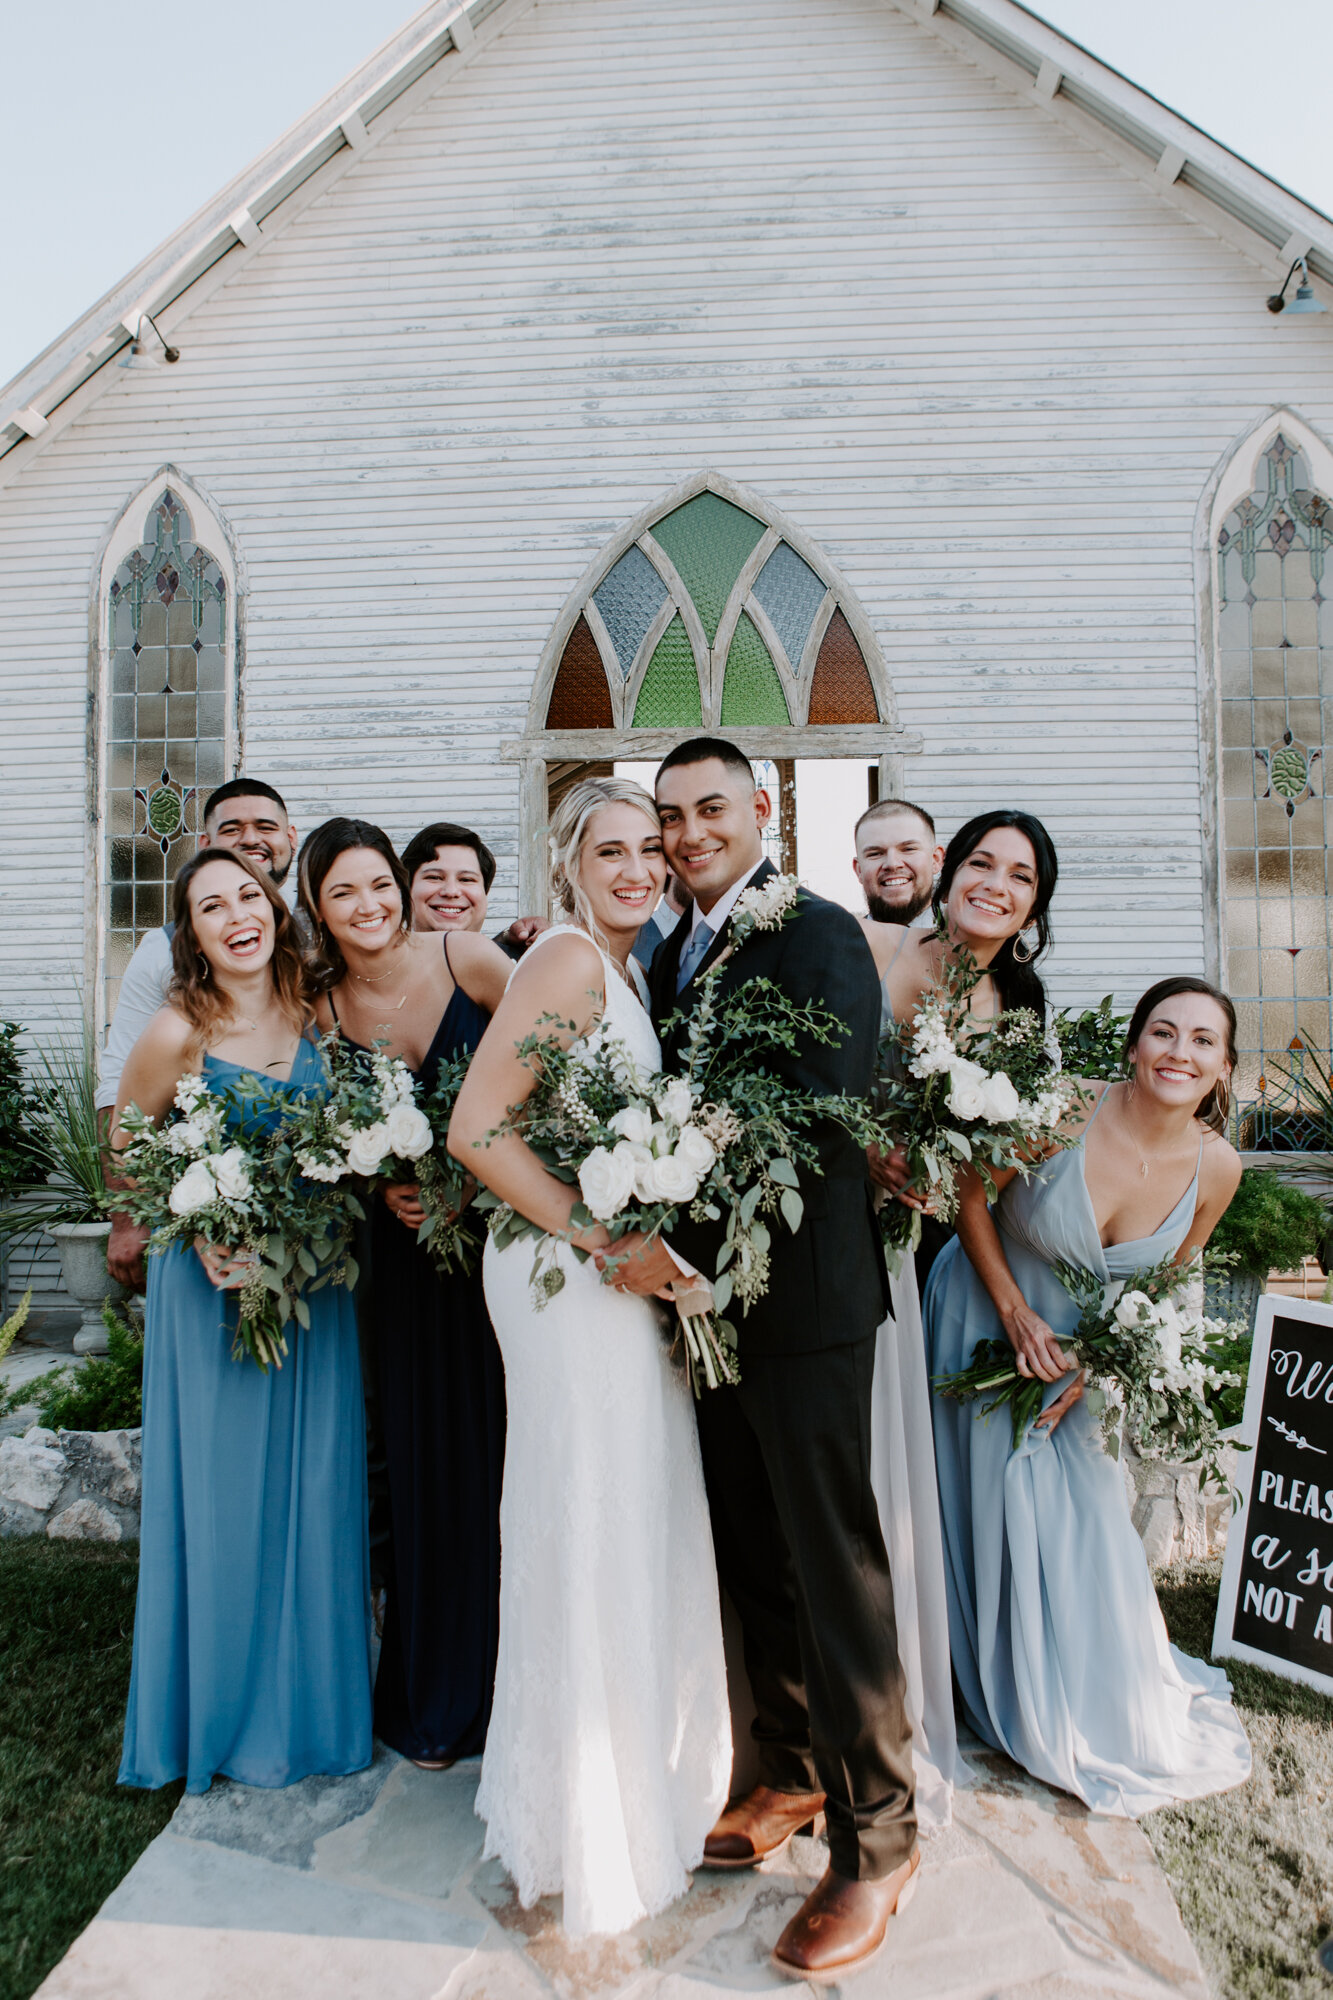 Bride and groom with bridal party having fun. Radiant Bohemian Hill Country Wedding at Gruene Estate in New Braunfels, TX